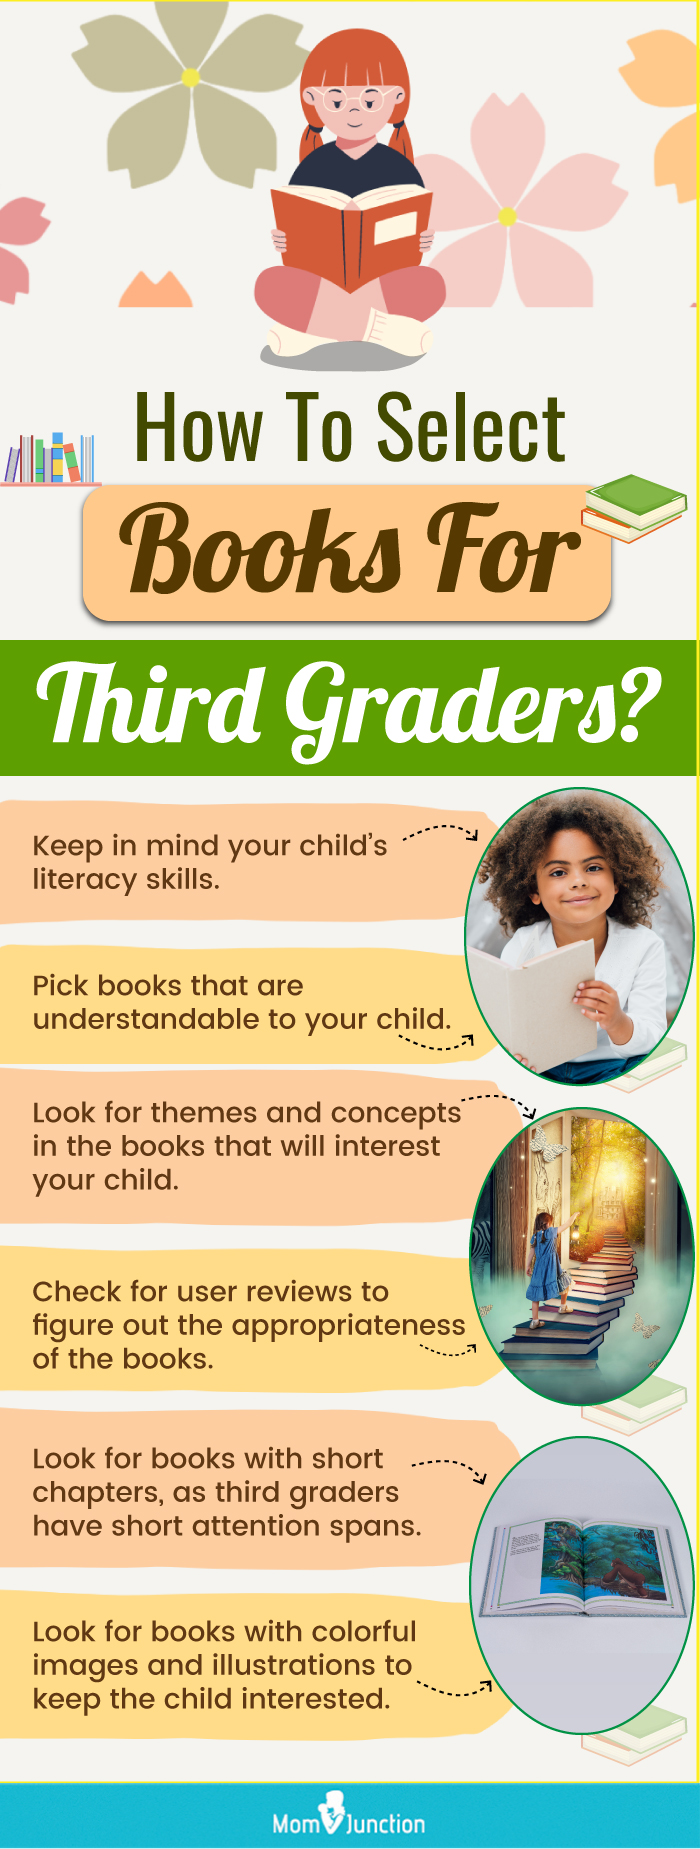 How To Select Books For Third Graders? (infographic)